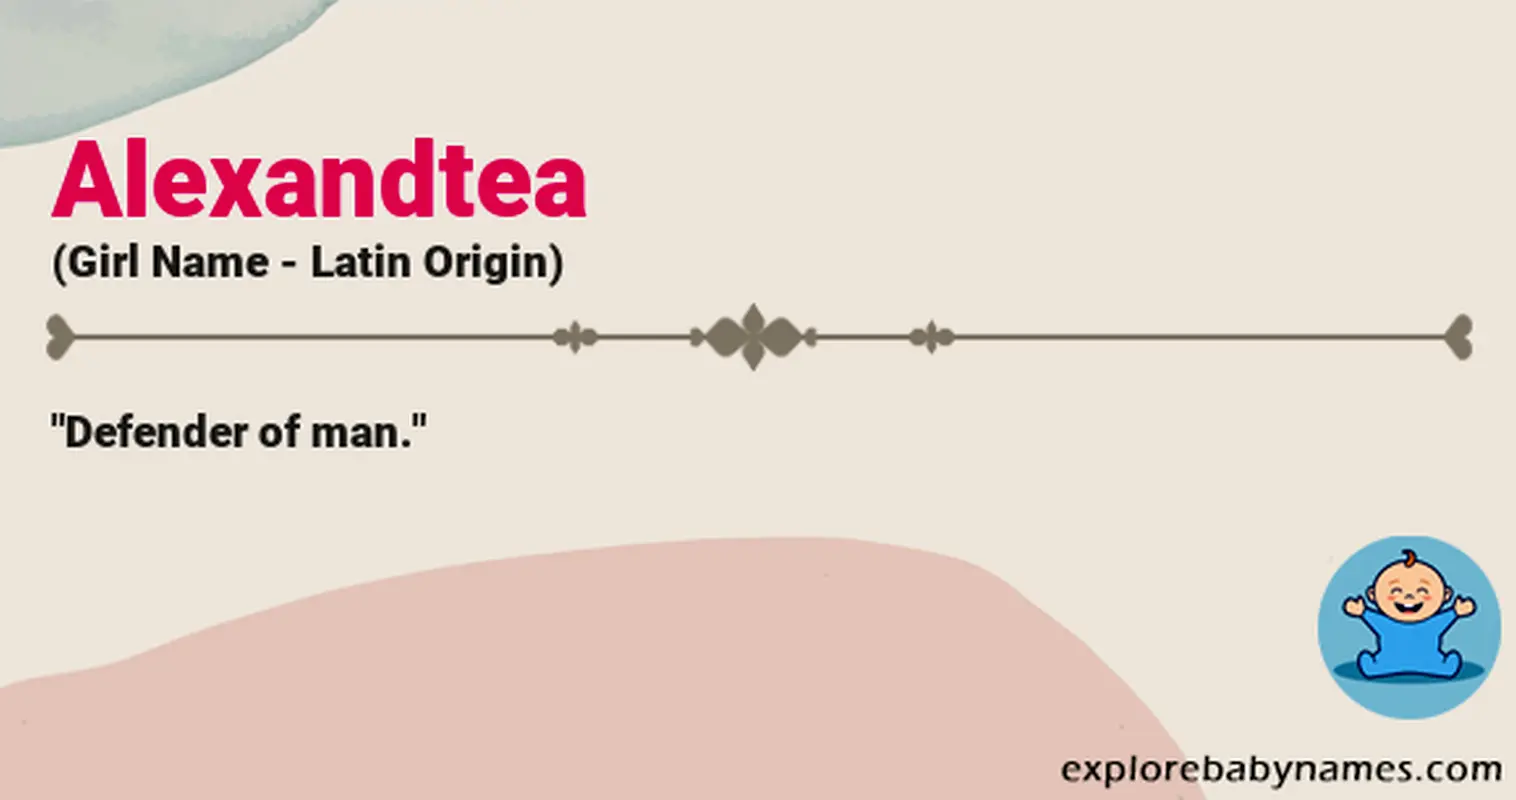 Meaning of Alexandtea